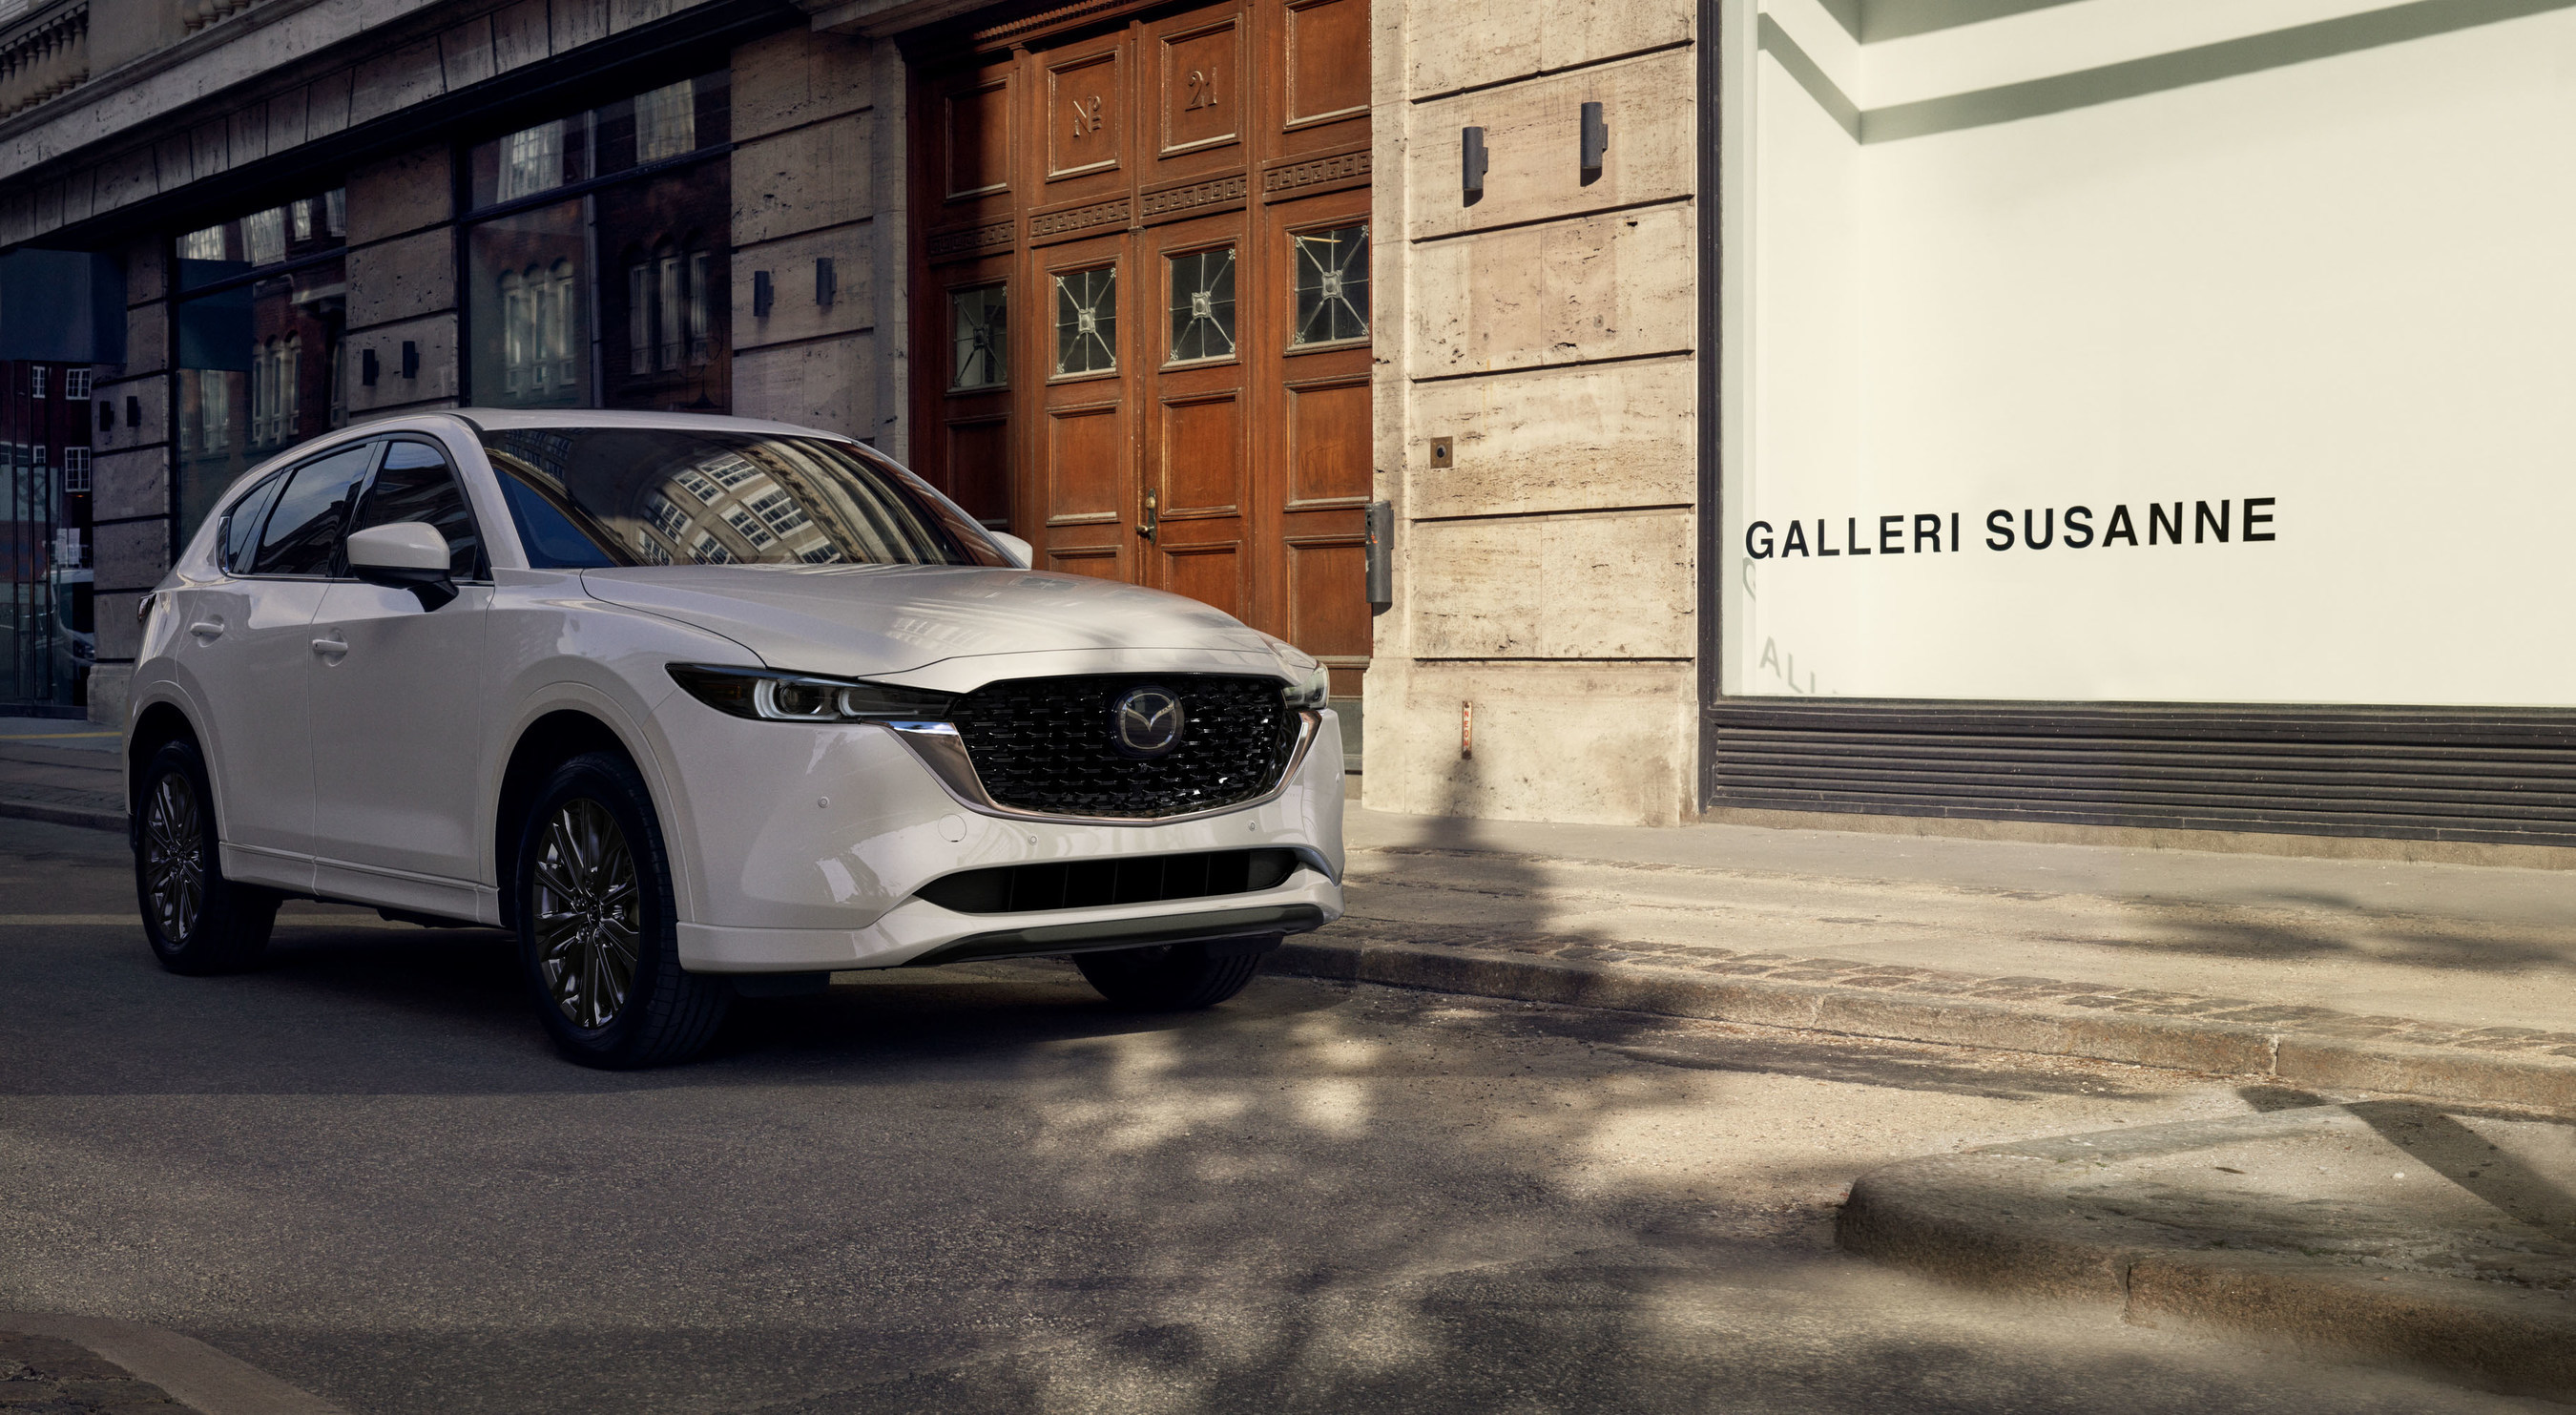 2022 Mazda CX-5, Features of the 2022 Mazda CX-5 Turbo, Days of a Domestic Dad